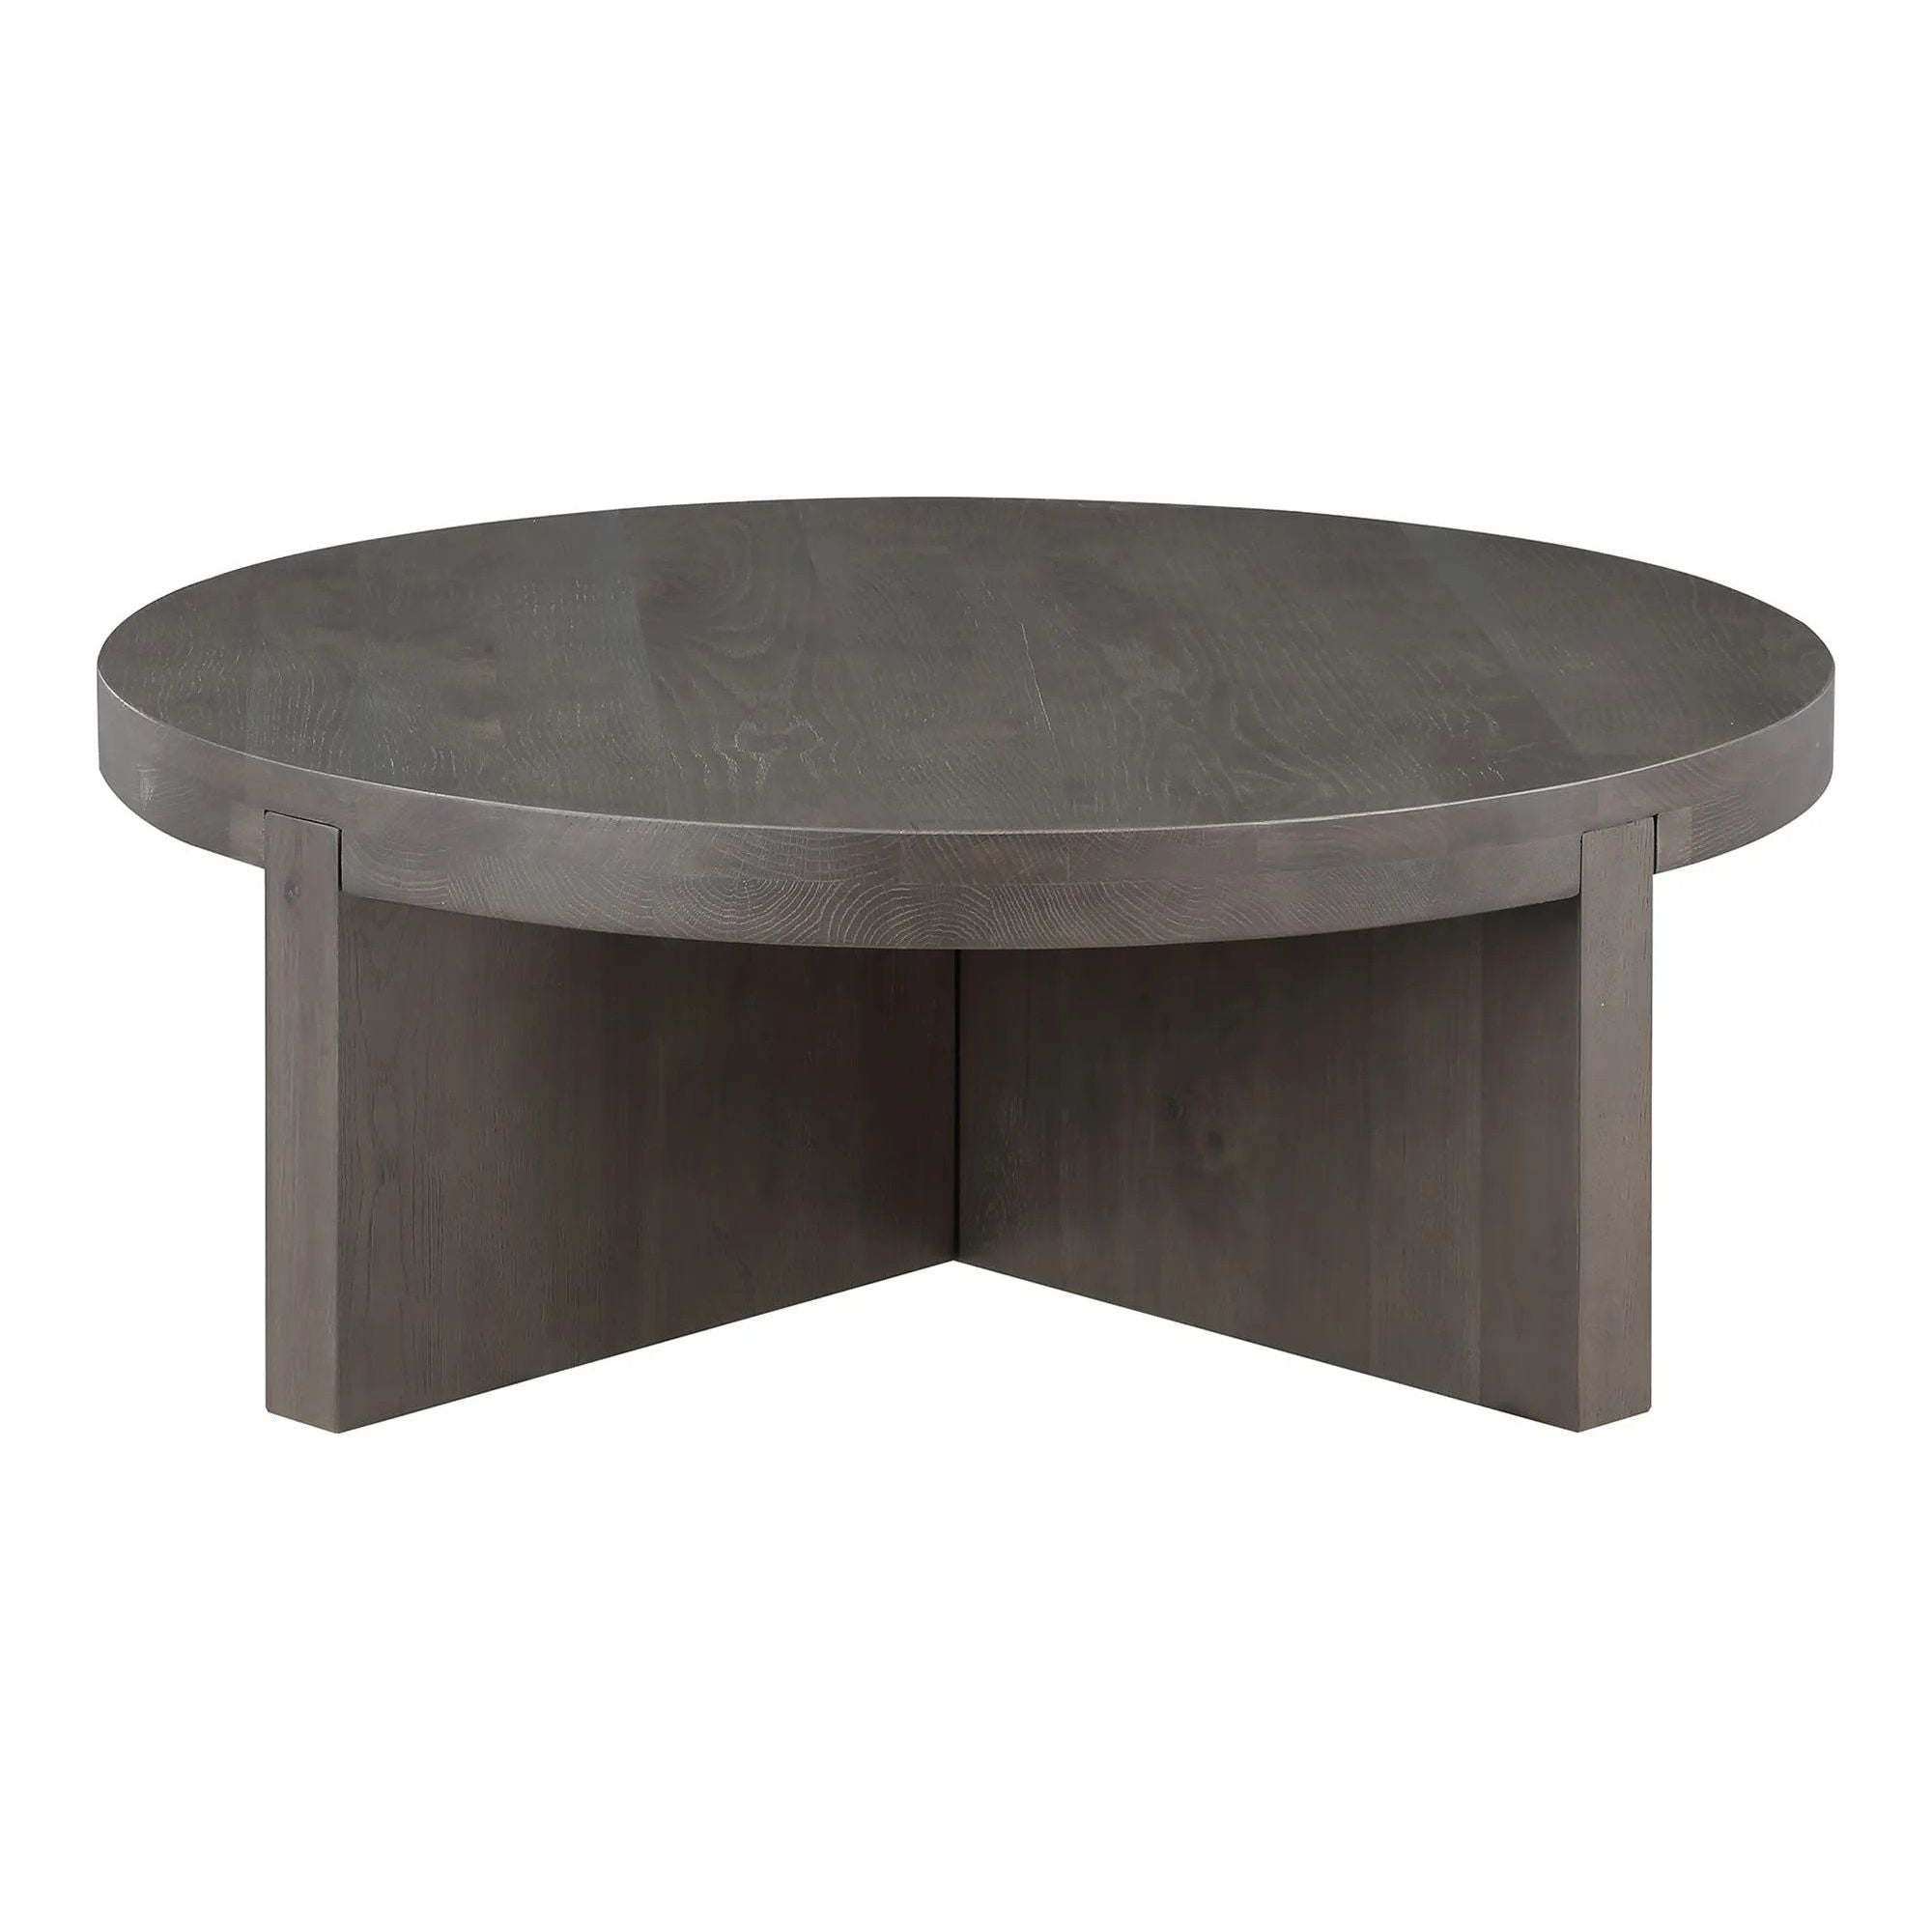 Bringing new levels of connection to interior living, the Folke round coffee table is a showcase of nature’s majesty. Entirely constructed from solid brown oak, the individual components of this piece are beautifully shaped and joined, coming together in absolute harmony. Natural woodgrain and artisanal craft make Folke an all-natural standout Amethyst Home provides interior design, new home construction design consulting, vintage area rugs, and lighting in the Winter Garden metro area.